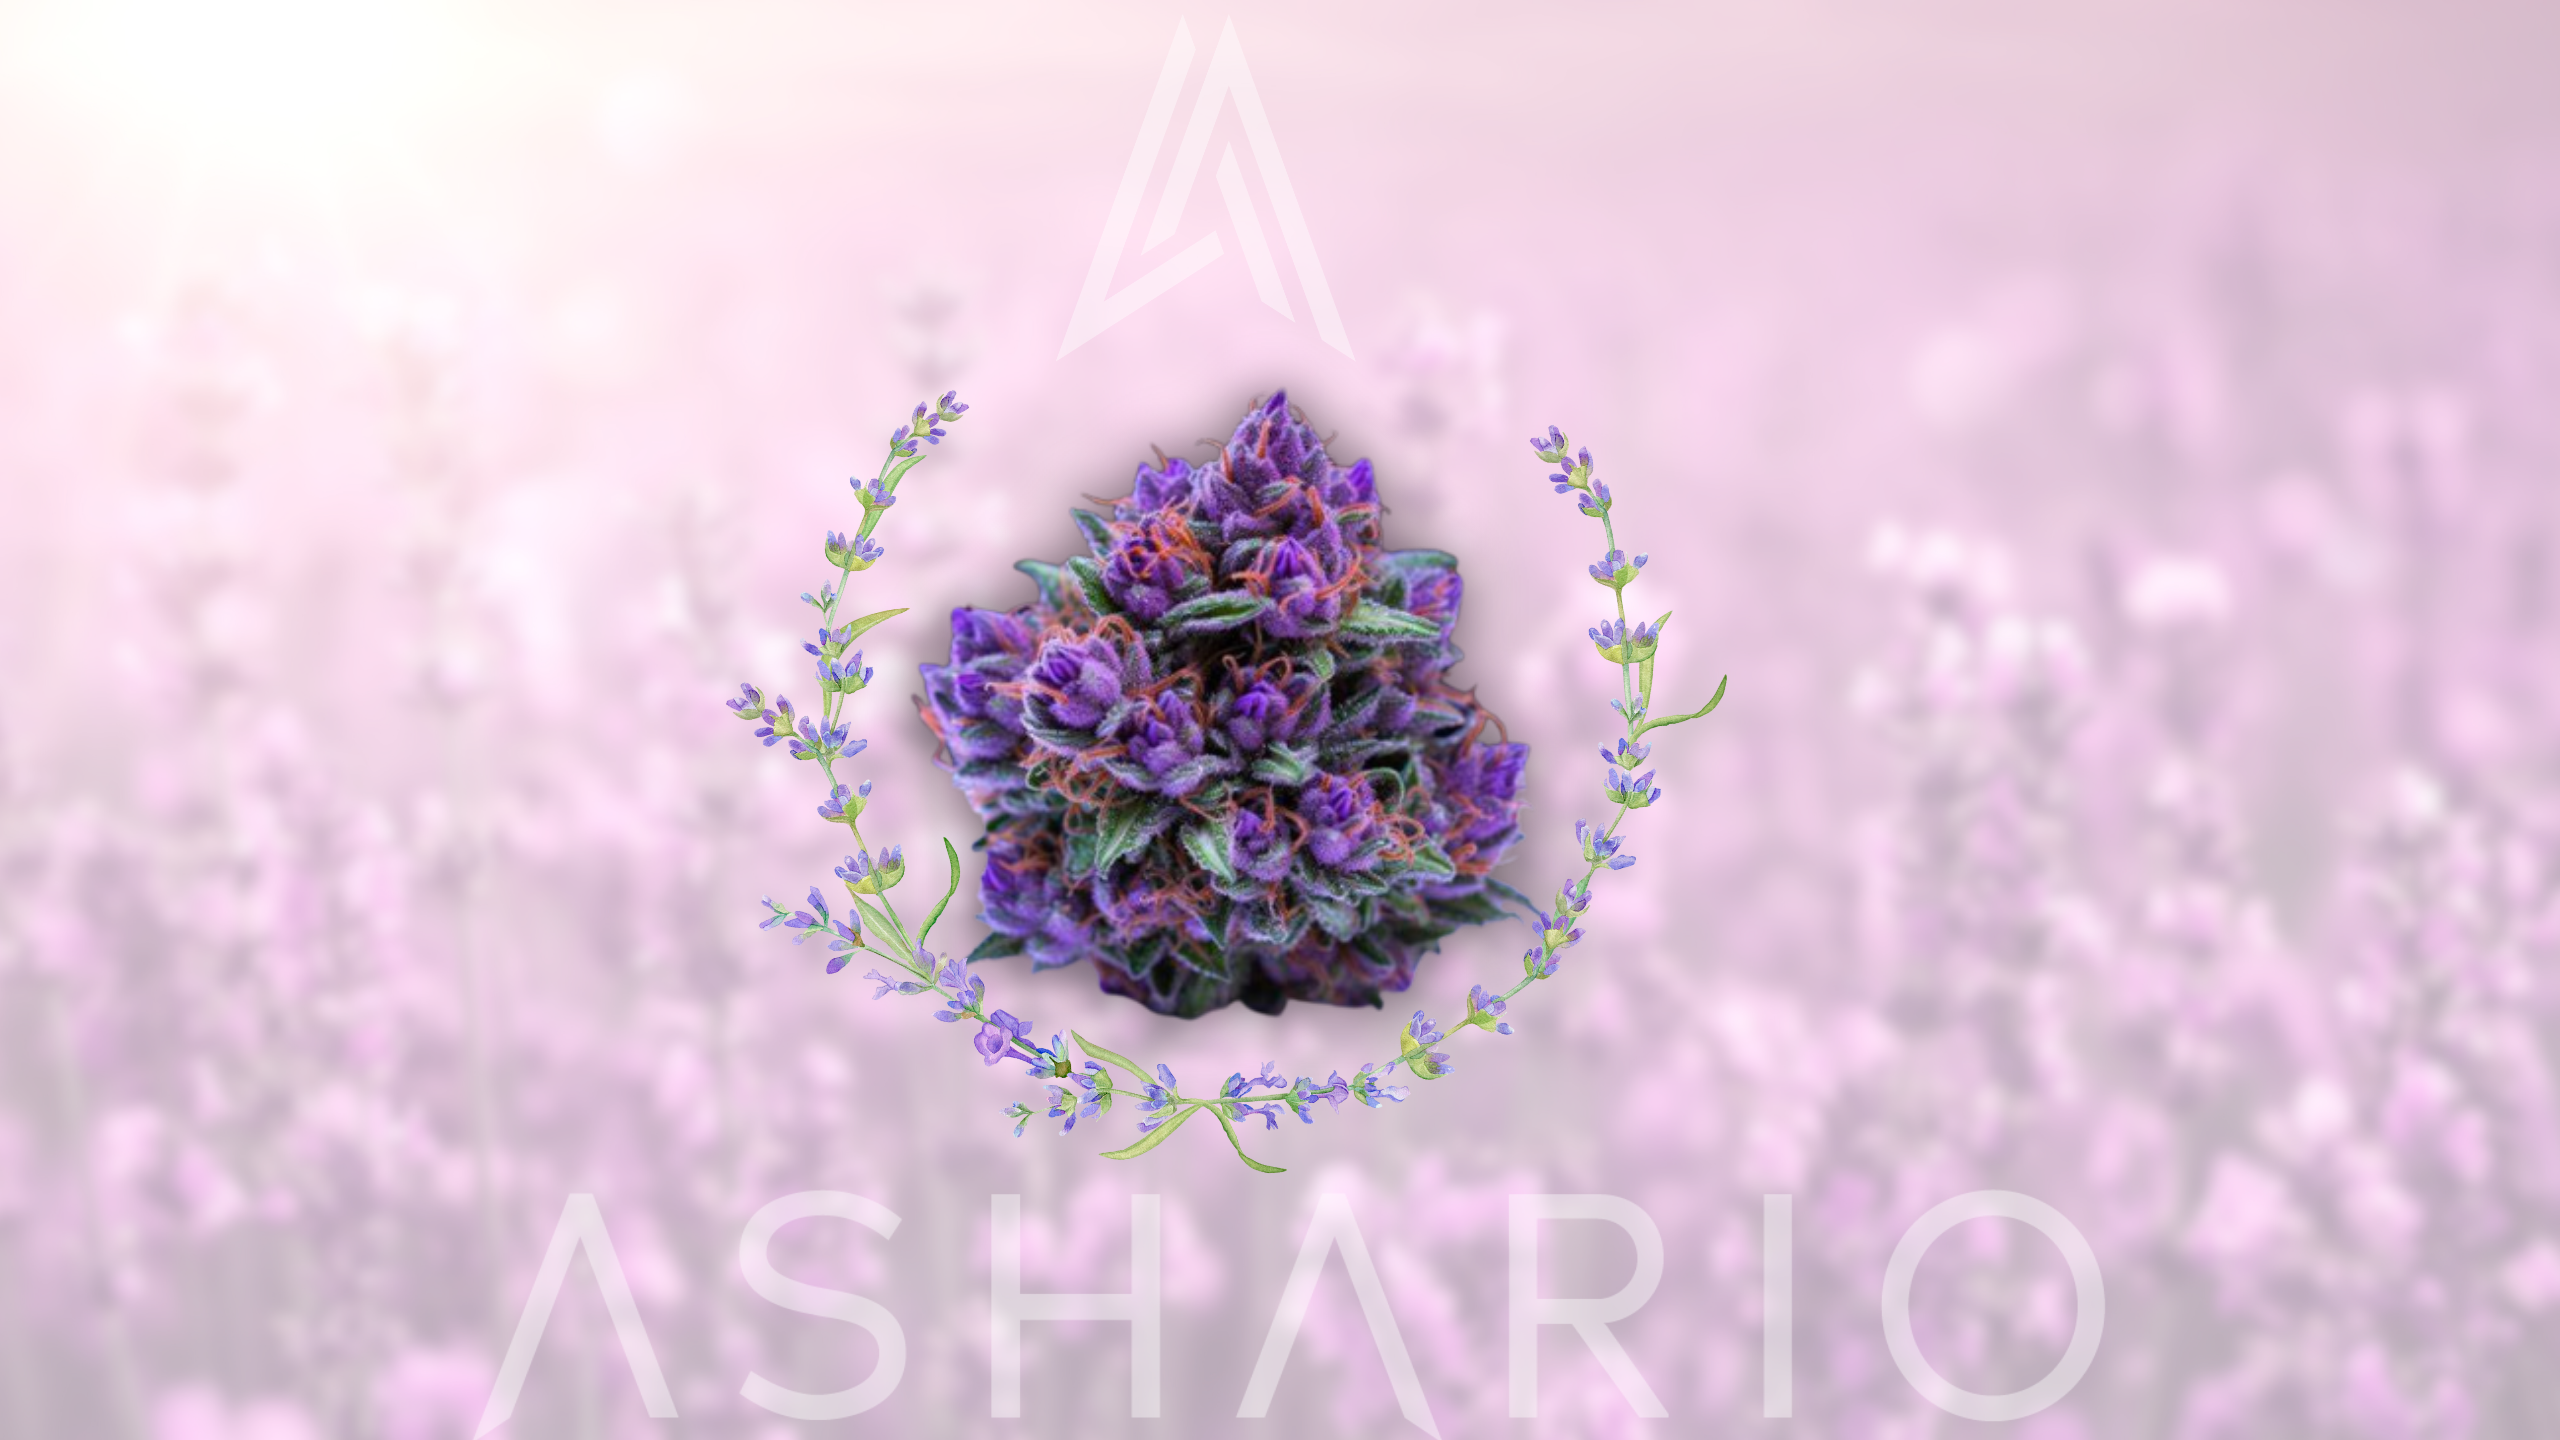 Join us on a journey into the natural benefits of cannabis as we explore the power of linalool terpene. Discover how this aromatic compound, found in various cannabis strains, offers a range of therapeutic properties.